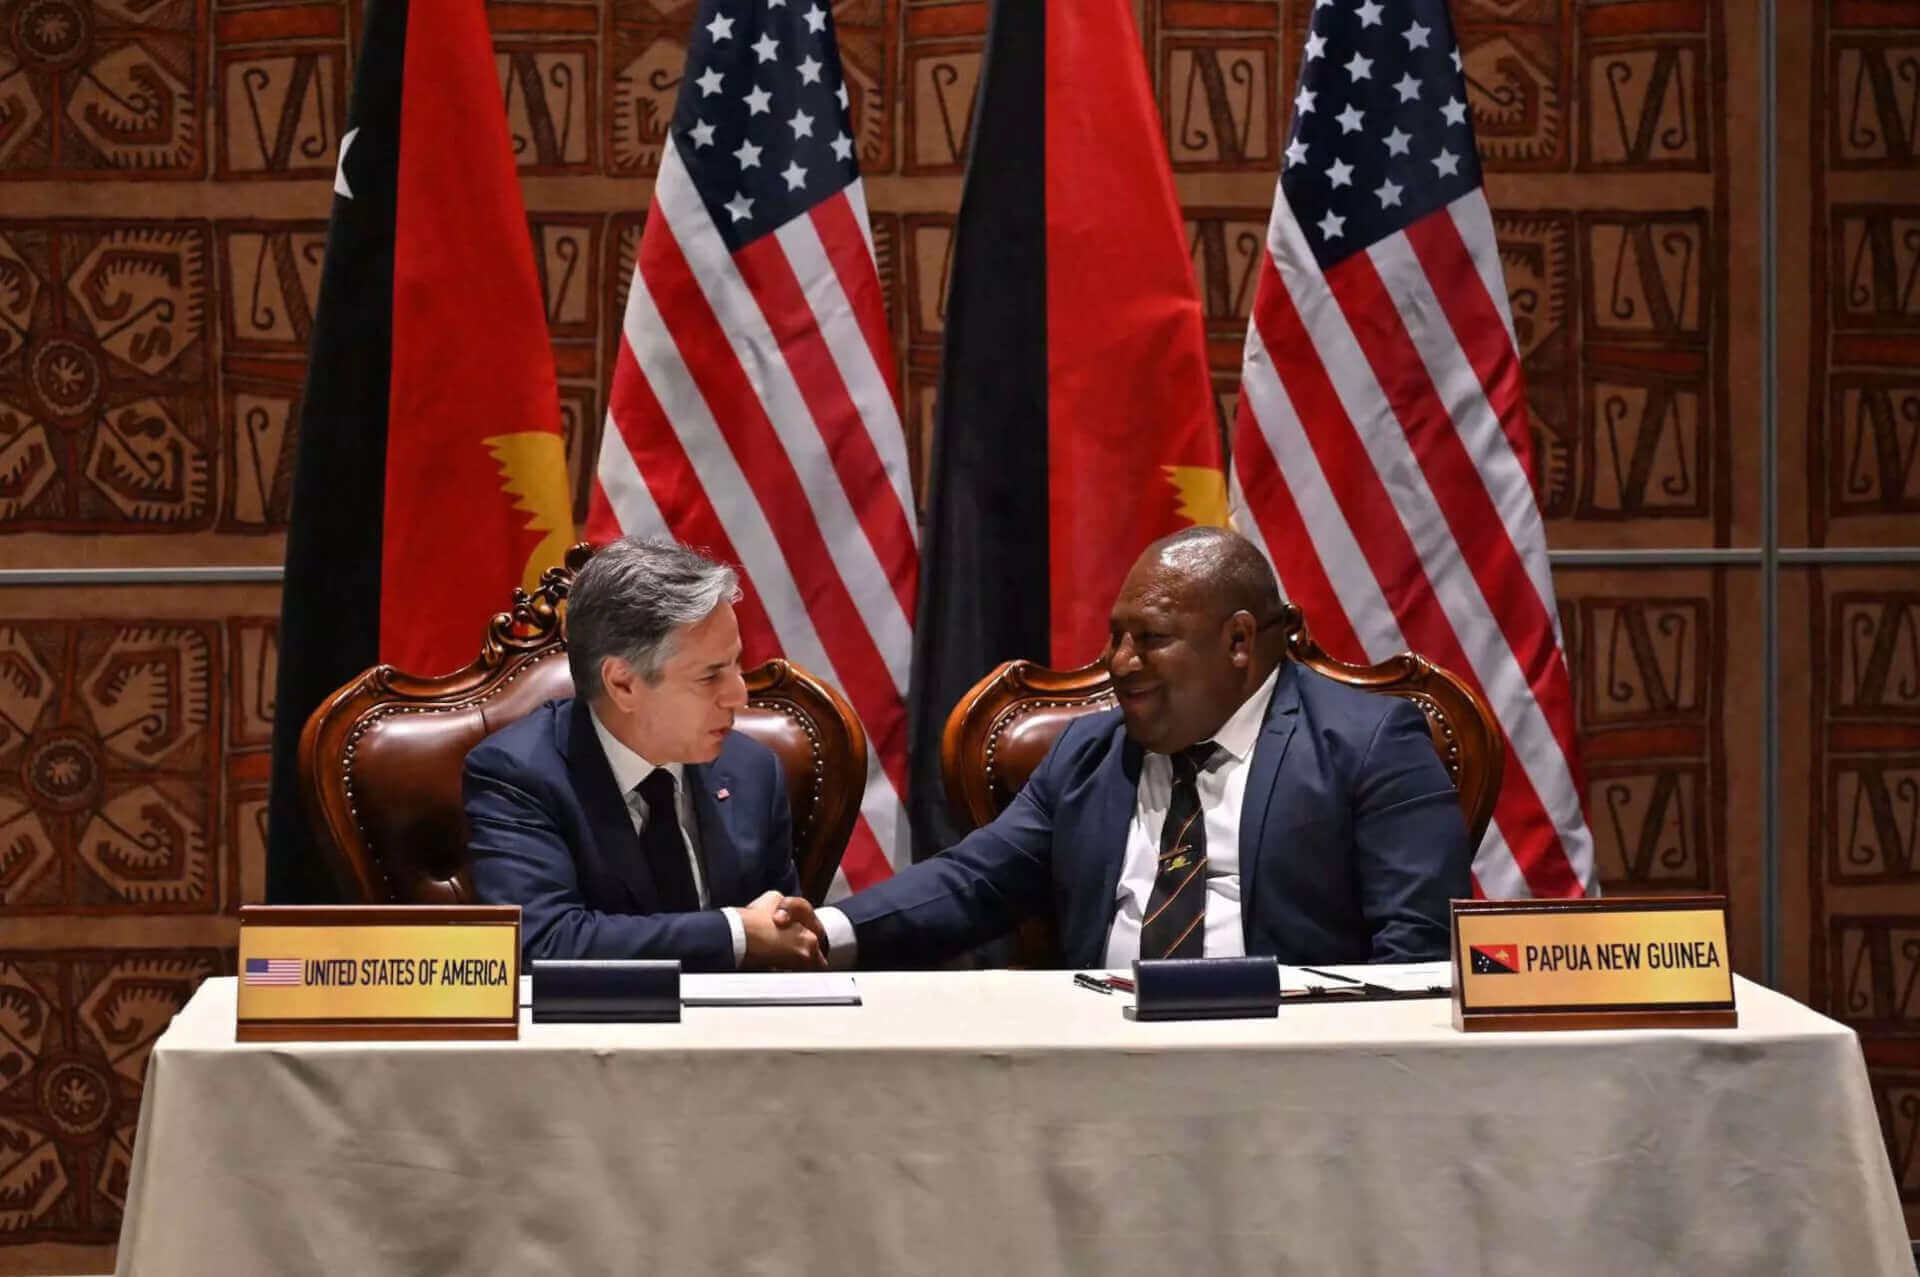 China Warns Against “Geopolitical Games” After New US, Papua New Guinea Defence Agreement